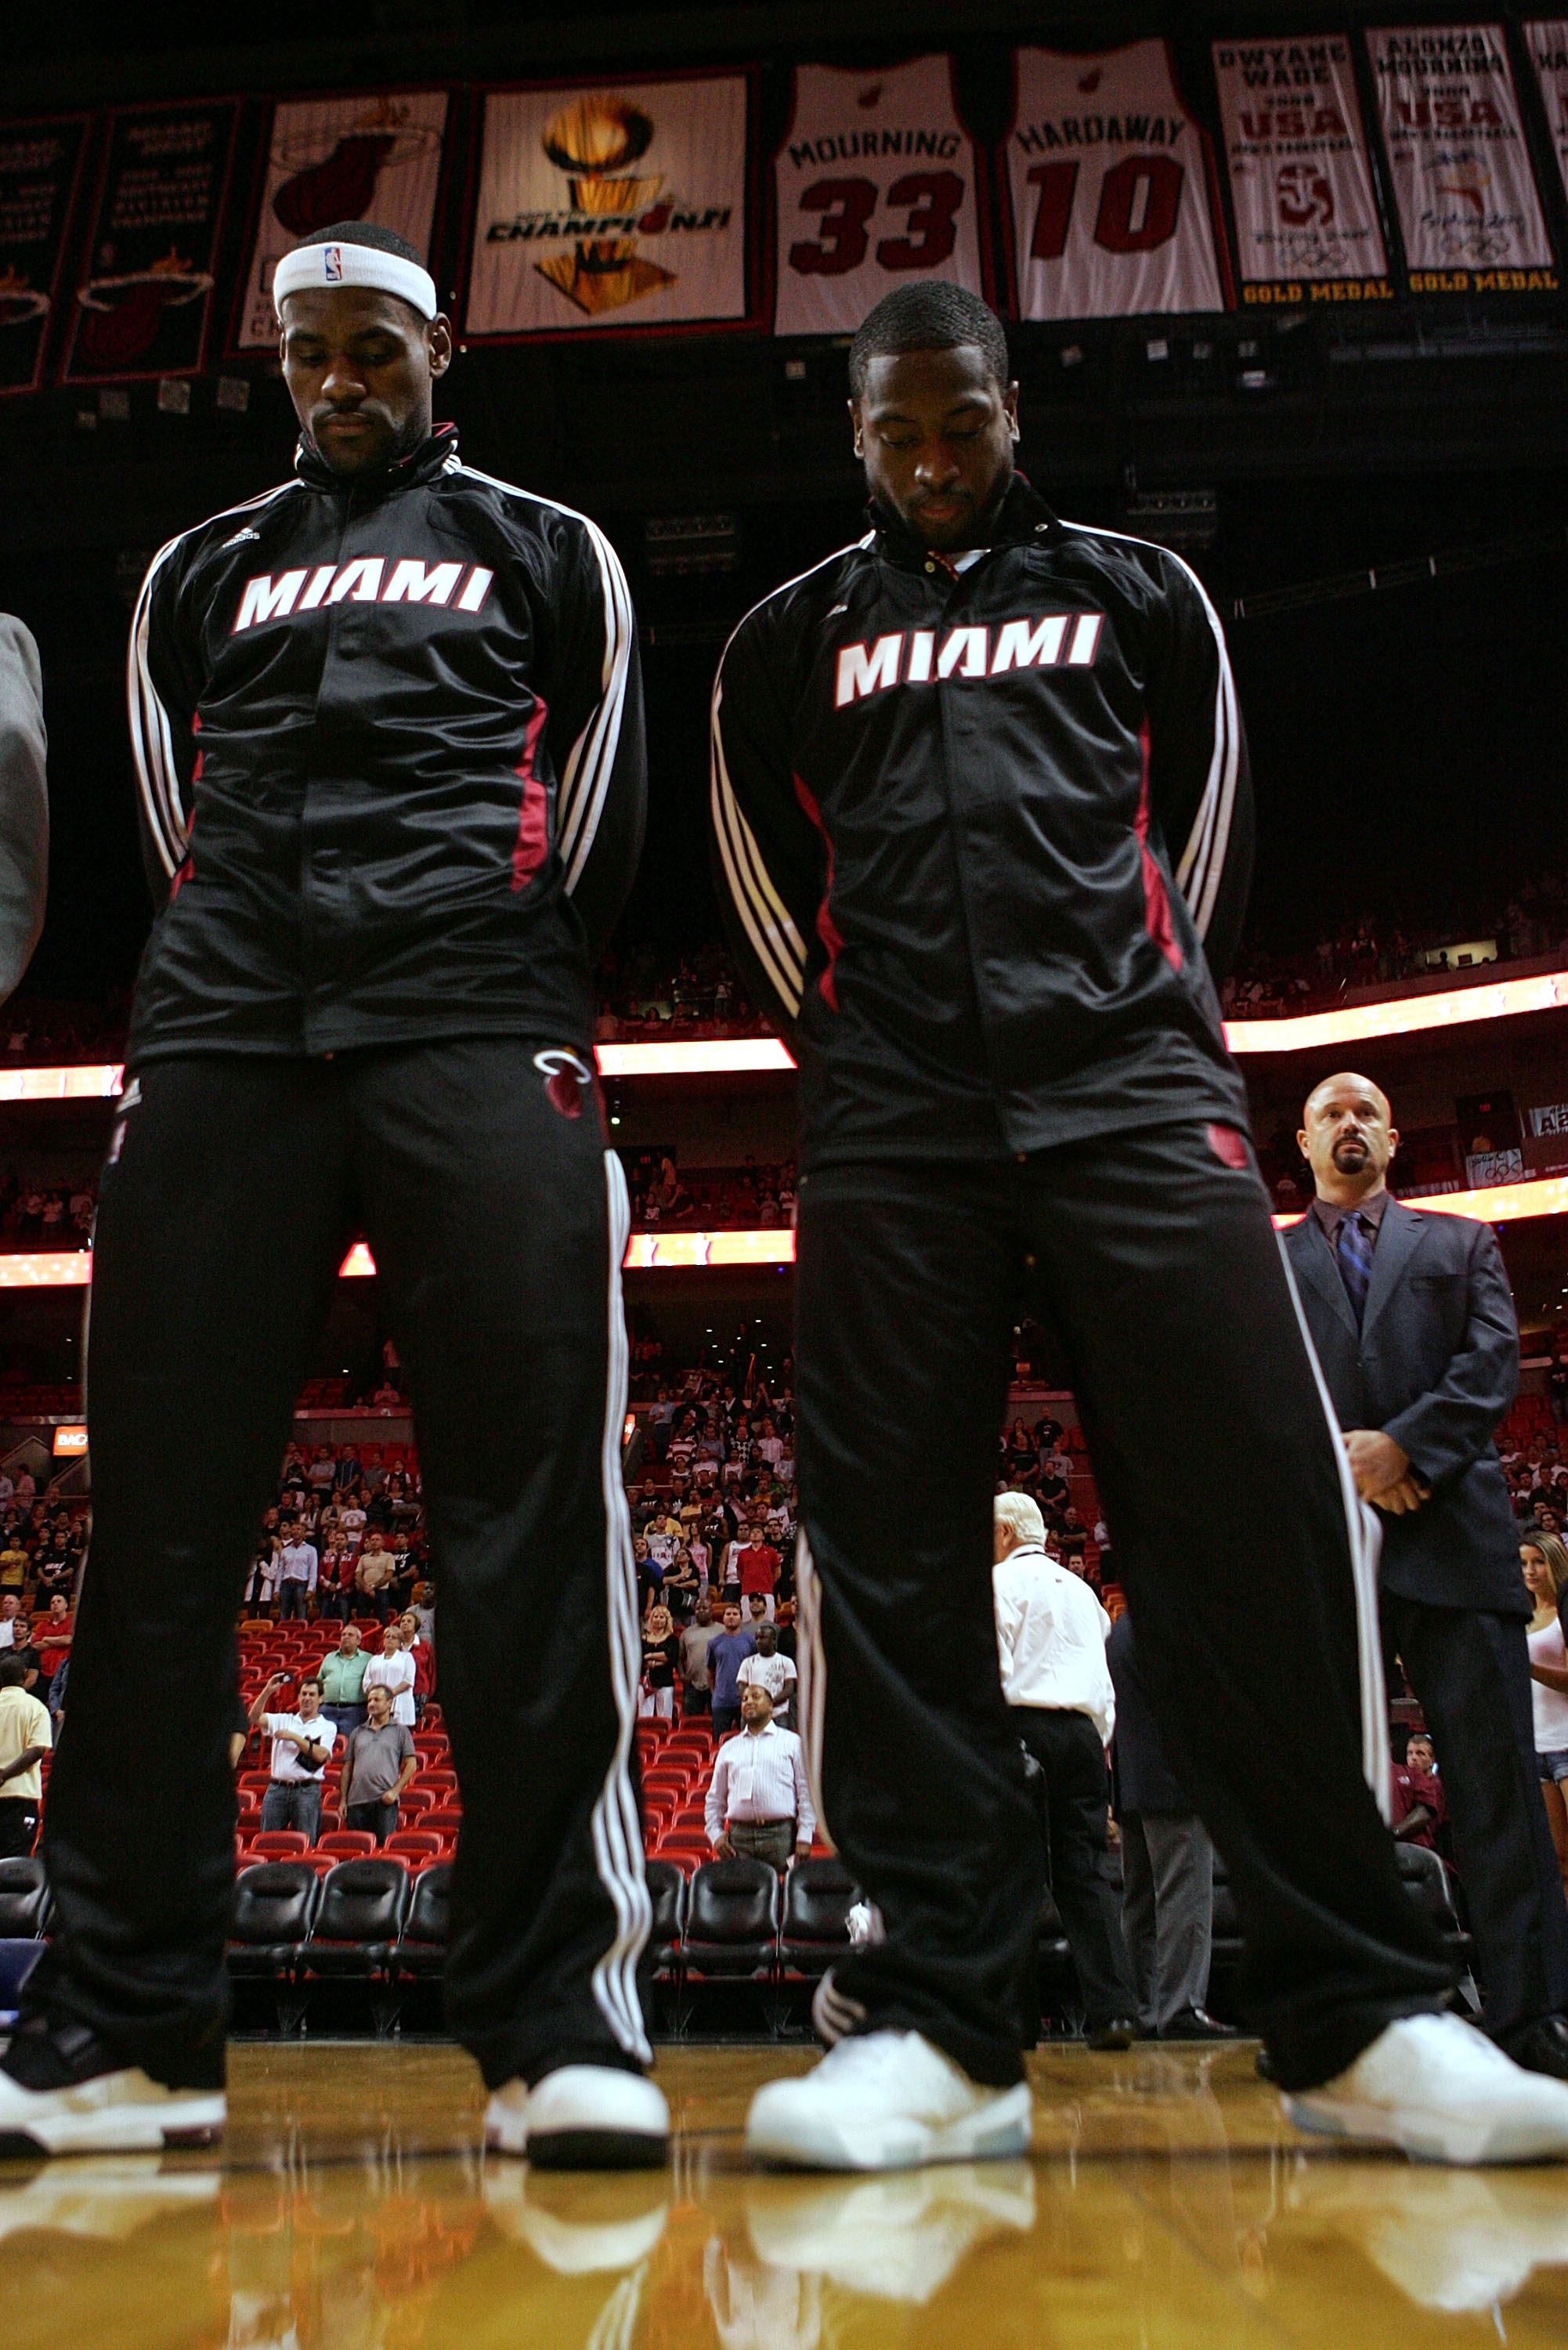 MIAMI - OCTOBER 12:  Forward LeBron James #6 and Dwyane Wade #3 of the Miami Heat prior to playing CSKA Moskow on October 12, 2010 in Miami, Florida.  NOTE TO USER: User expressly acknowledges and agrees that, by downloading and or using this photograph,